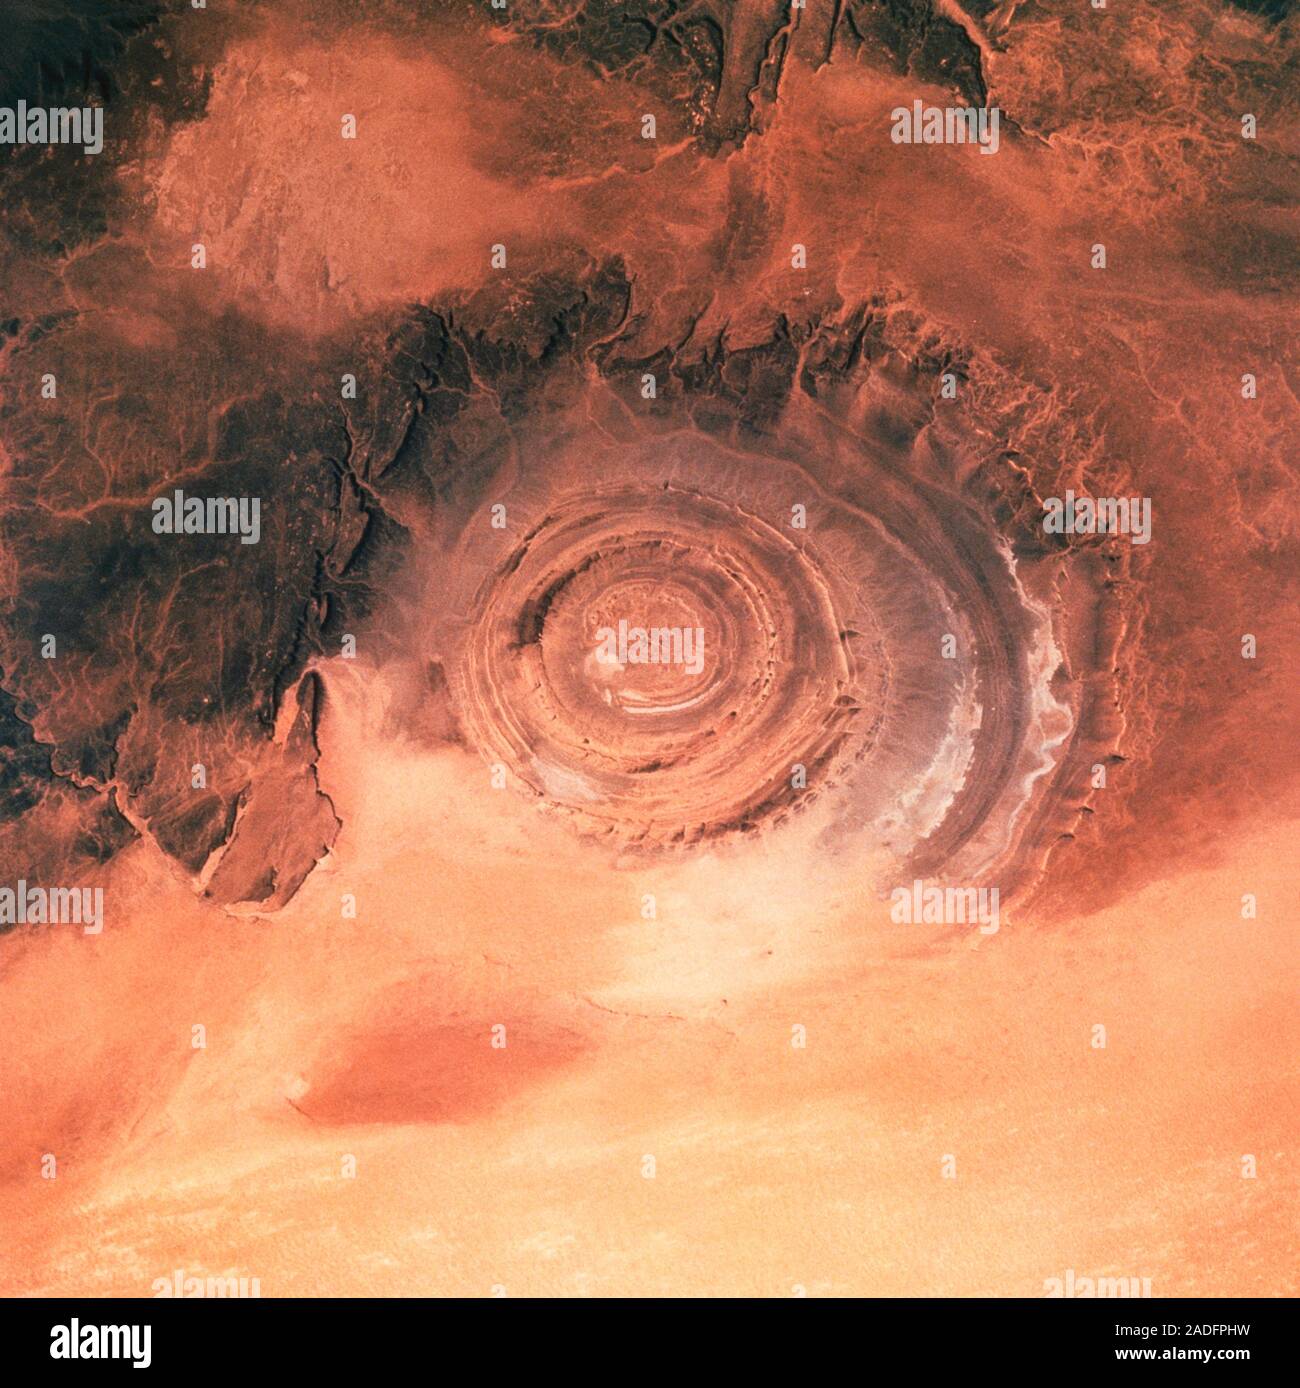 The Richat Structure. View of the Richat Structure in the Sahara Desert, as seen by the crew of Shuttle Mission STS-58 of 18 October to 1 November 199 Stock Photo